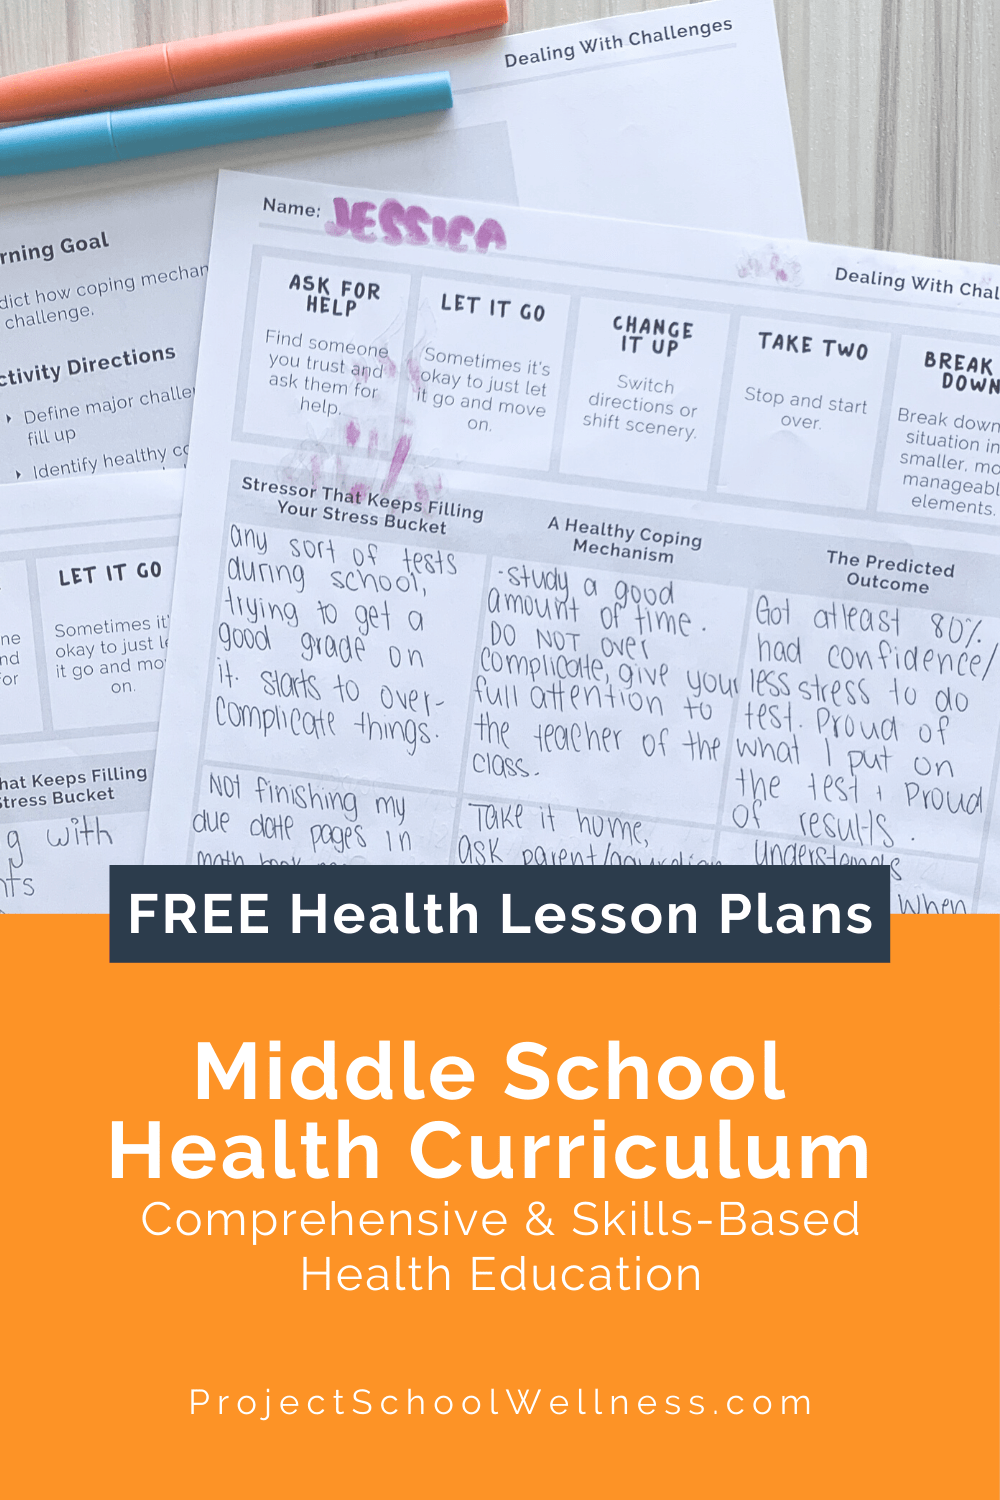 Download five FREE LESSON PLANS! Use this comprehensive and skills-based middle school health curriculum to teach students how to create a healthy life. This is a complete health education middle school program and comes with hundreds of health lesson plans requiring no extra planning and minimal prep. Includes health education posters, health education lessons, mental health lesson plan ideas, SEL activities for kids, health lessons for middle schools, and health worksheets.